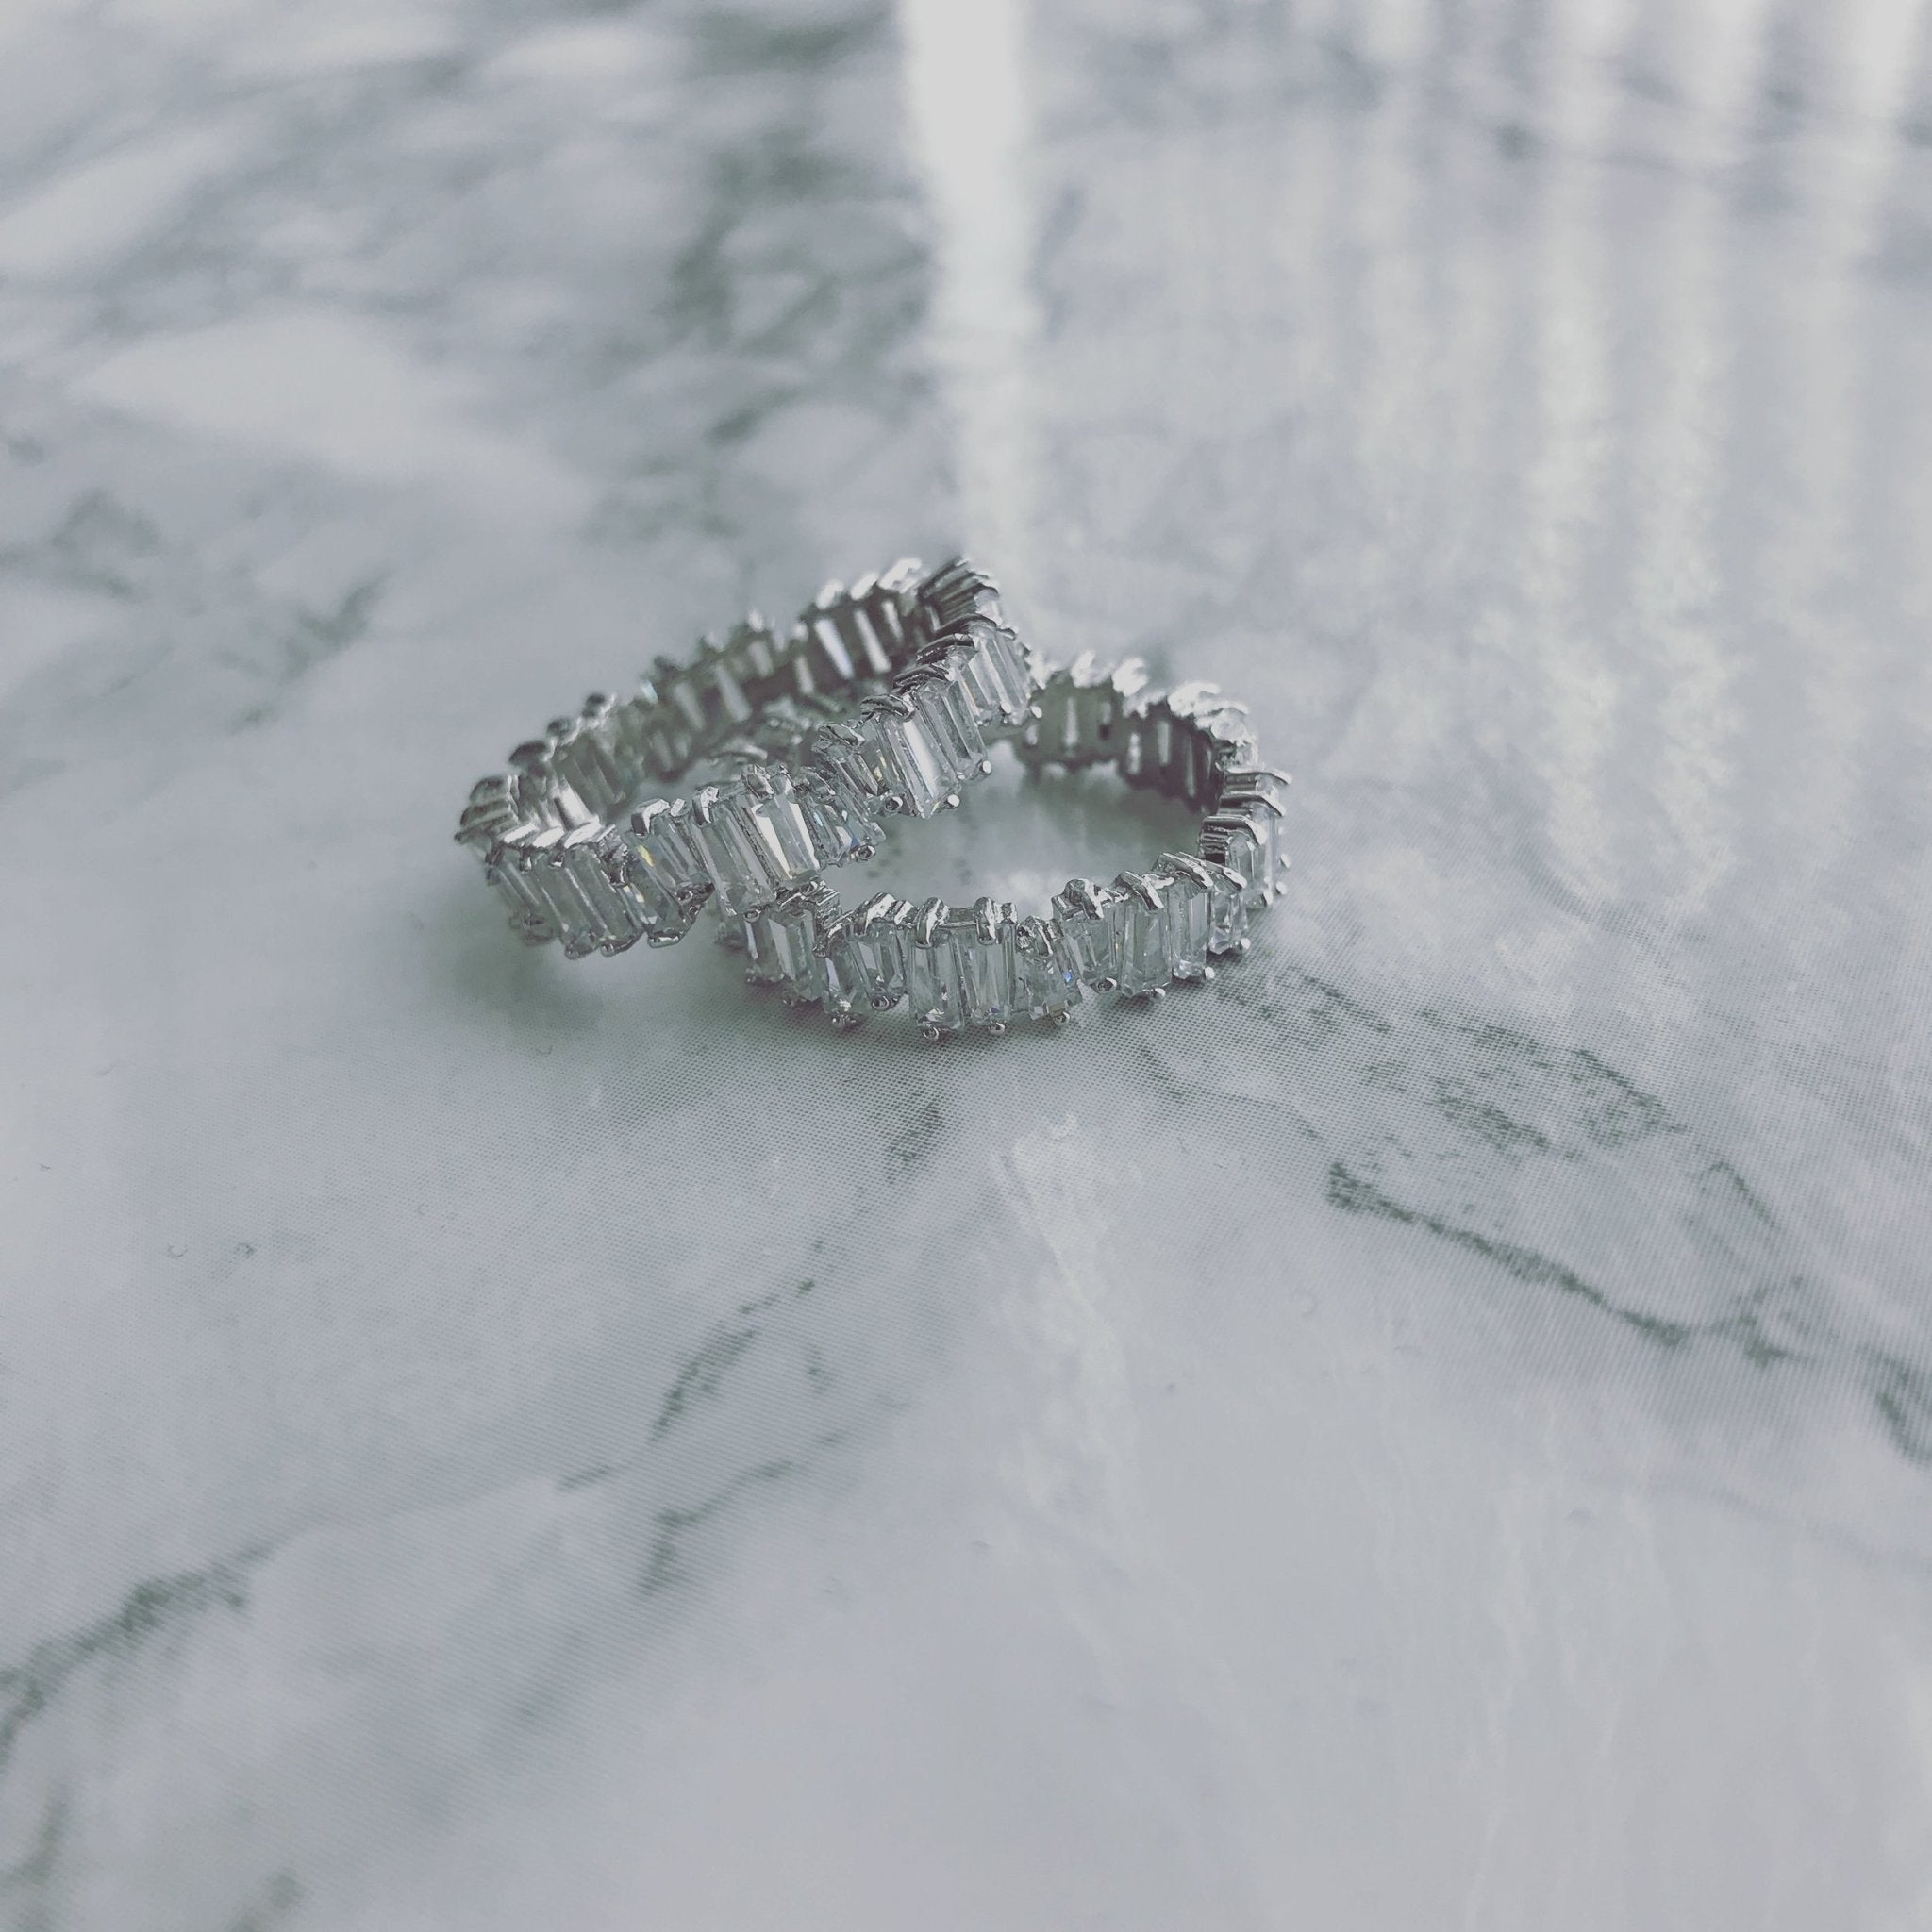 BAGUETTE ETERNITY BANDS [SET] - KING ME Custom Jewelry by PG